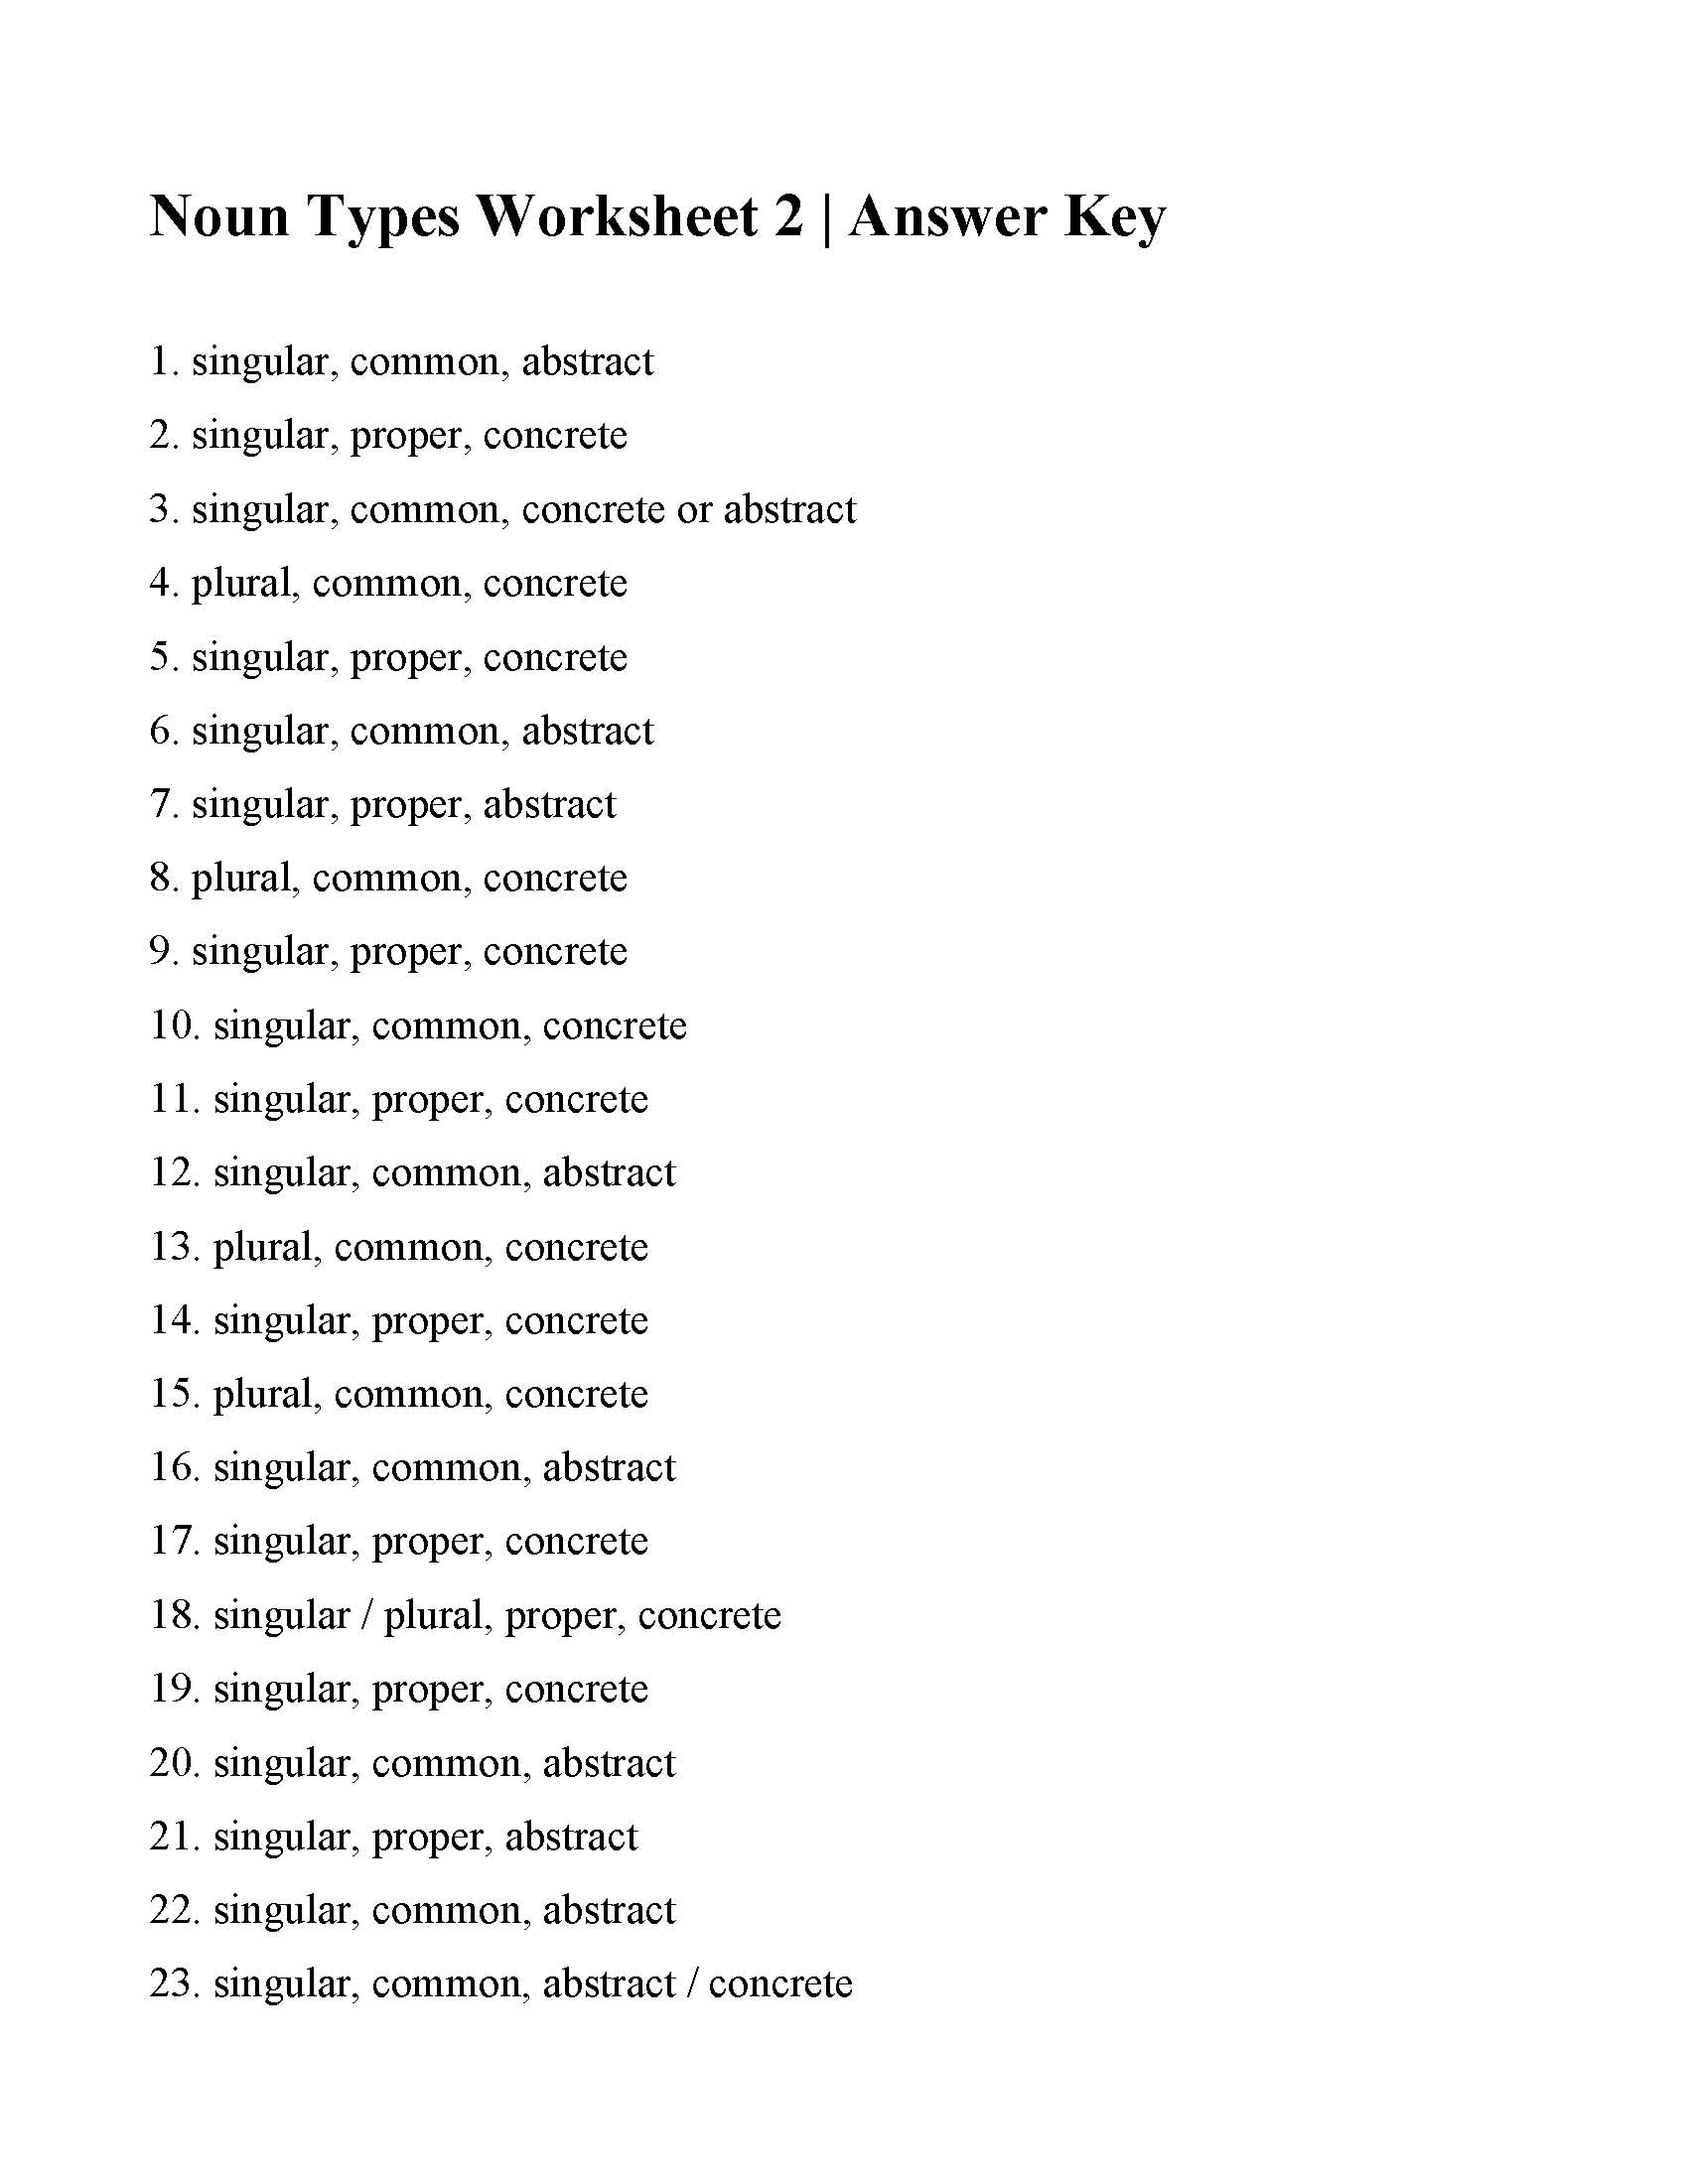 This is a preview image of Noun Types Worksheet 2. Click on it to enlarge it or view the source file.